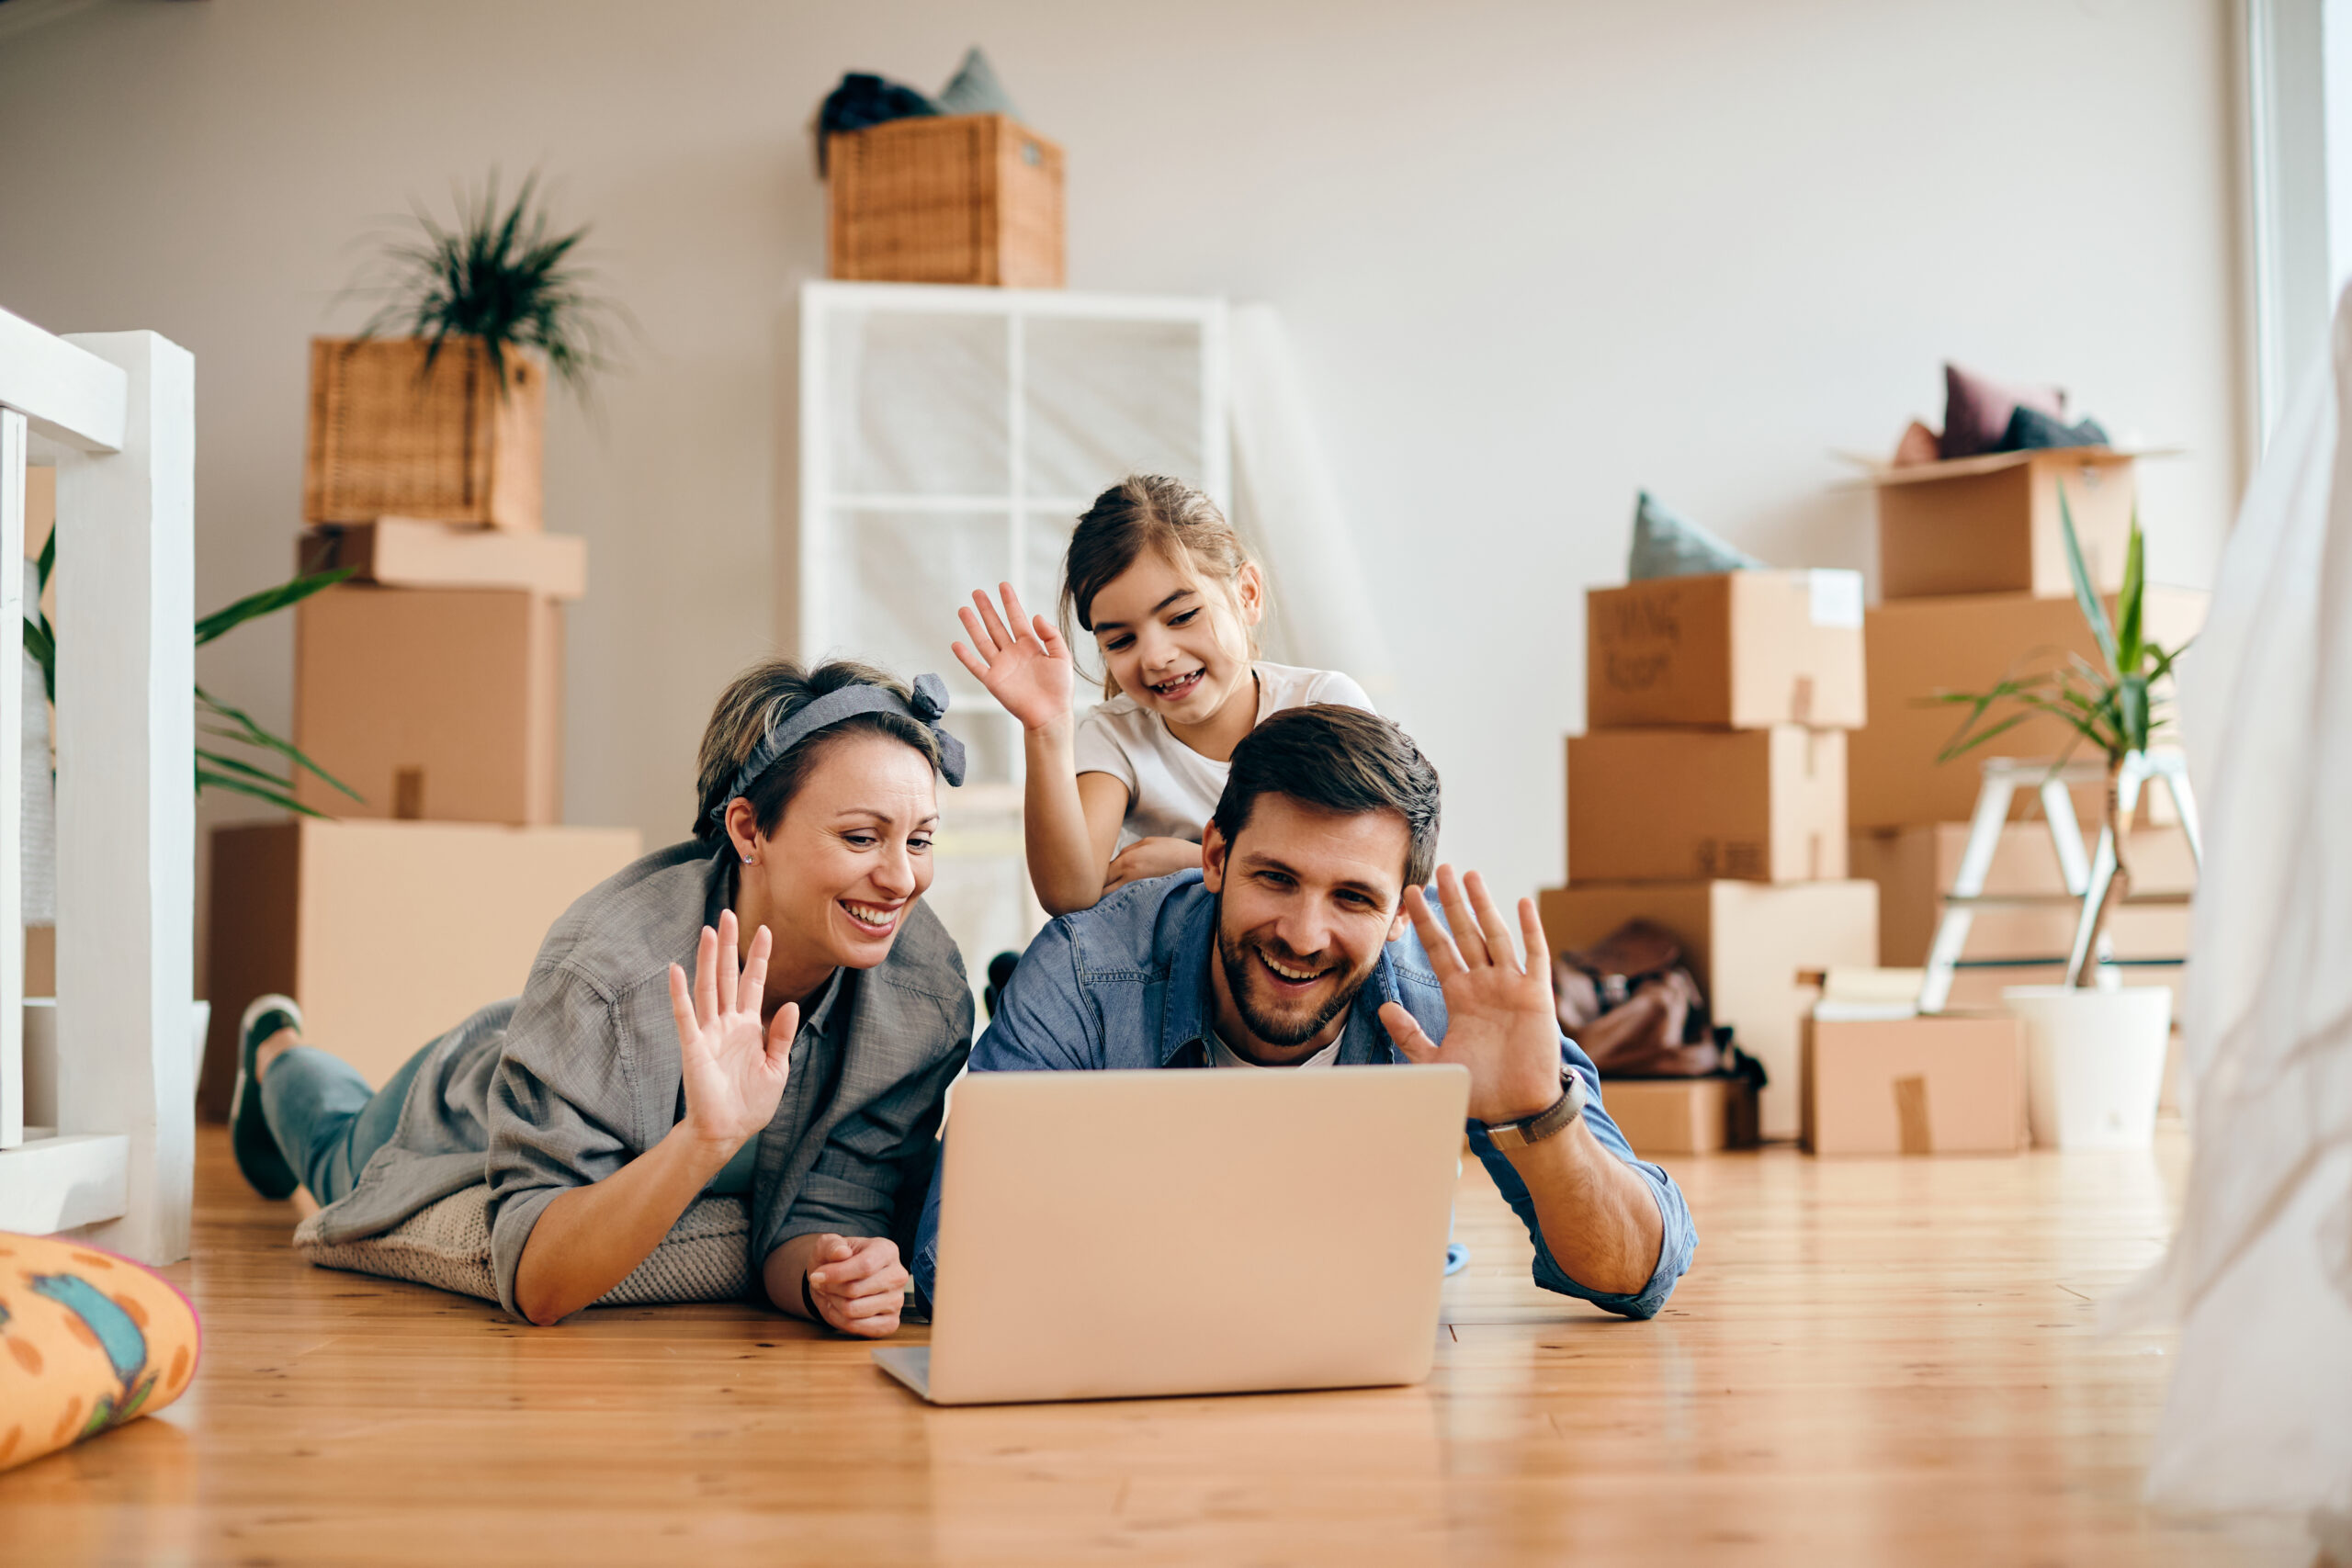 Tips for Moving Into a New House and Making It Your Own